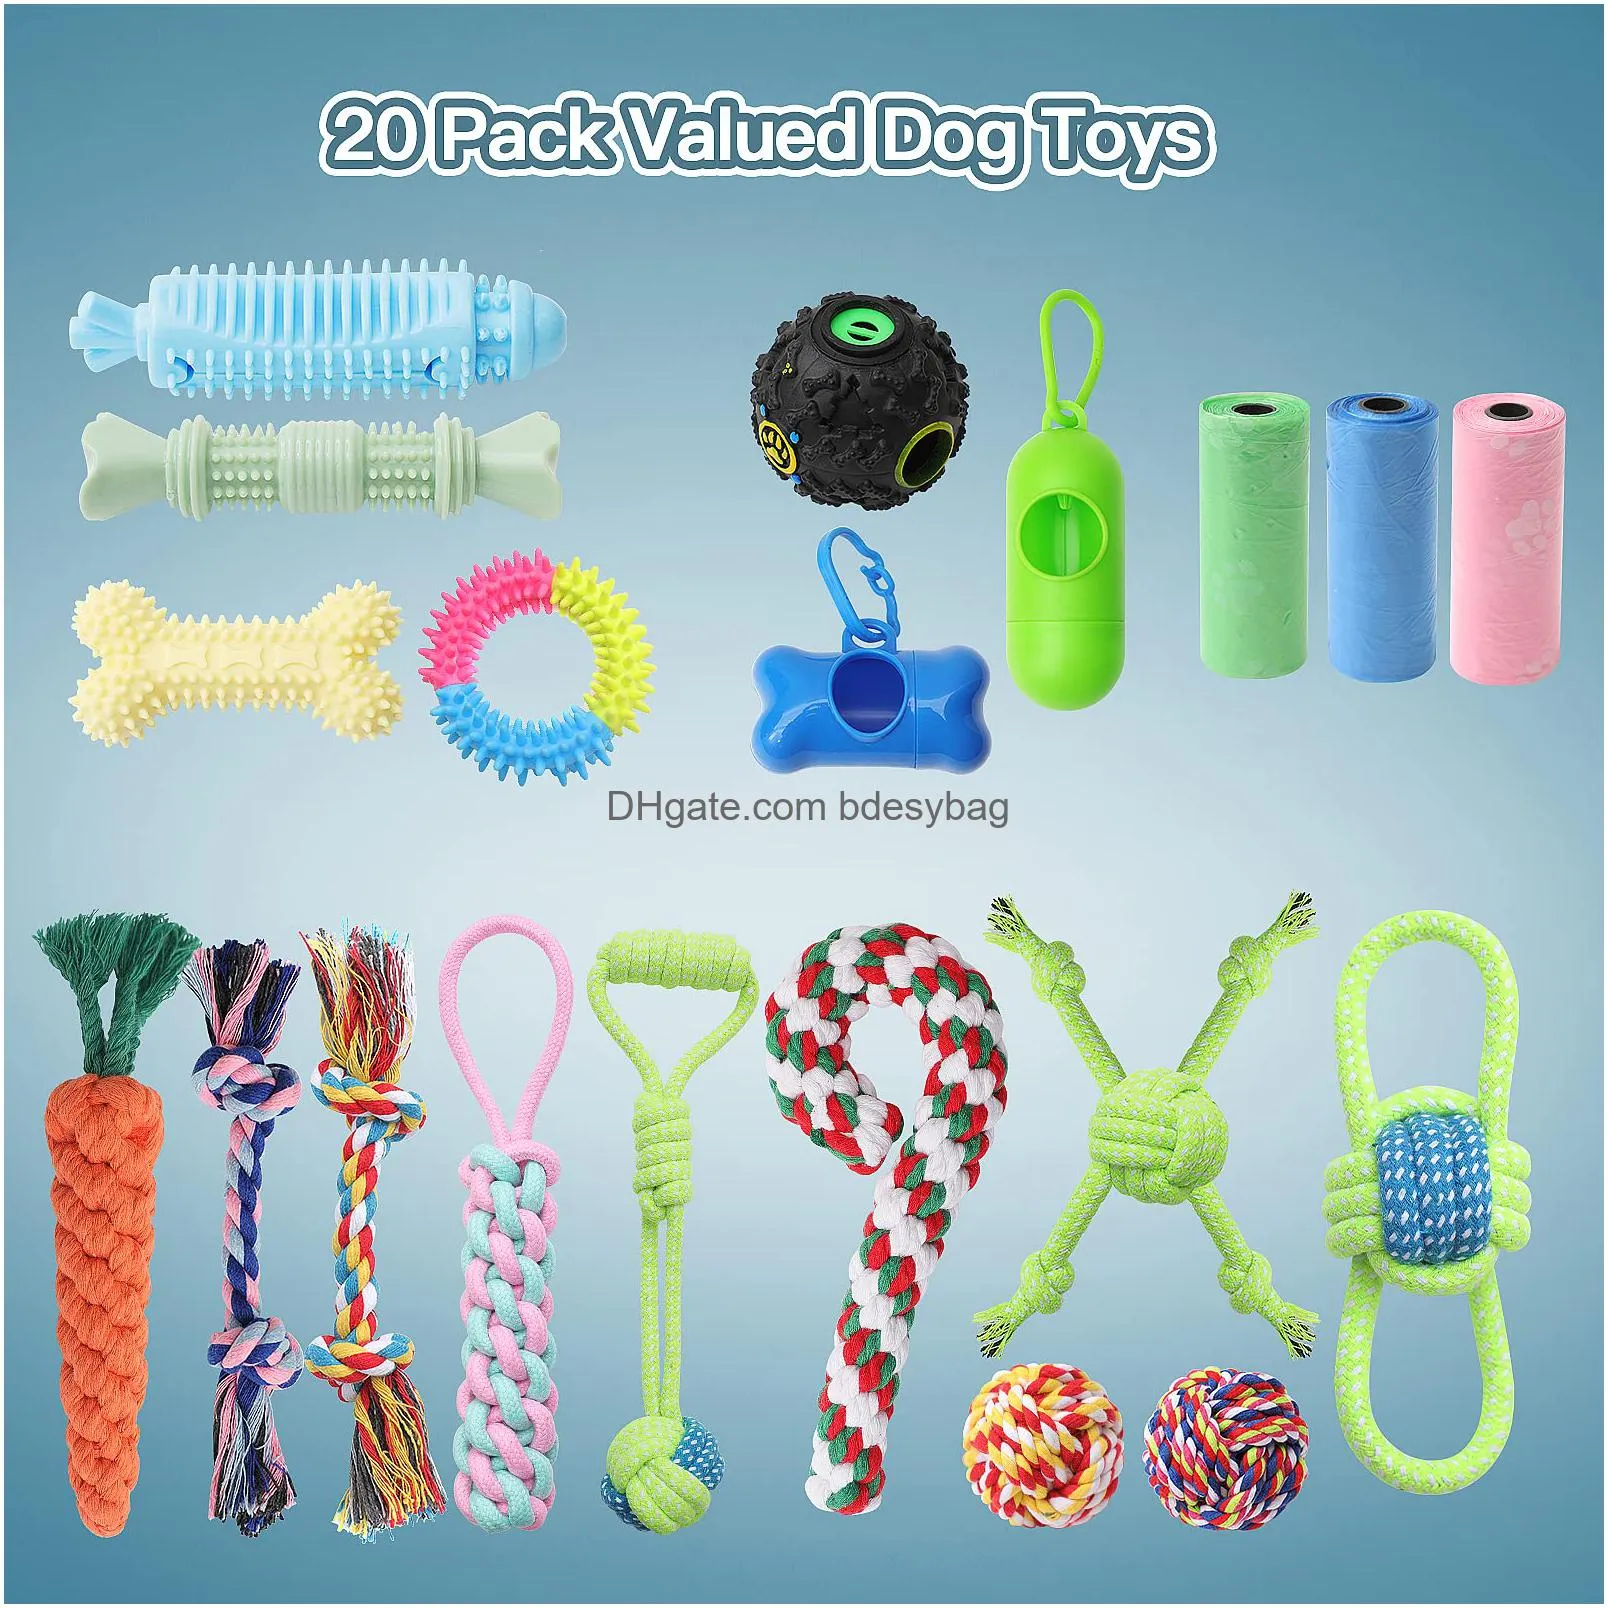 dog chew toys for puppy teething indestructible pet dog toys for puppy chewers interactive tug of war rope toys for puppies small dogs durable squeaky toys for boredom chew teething